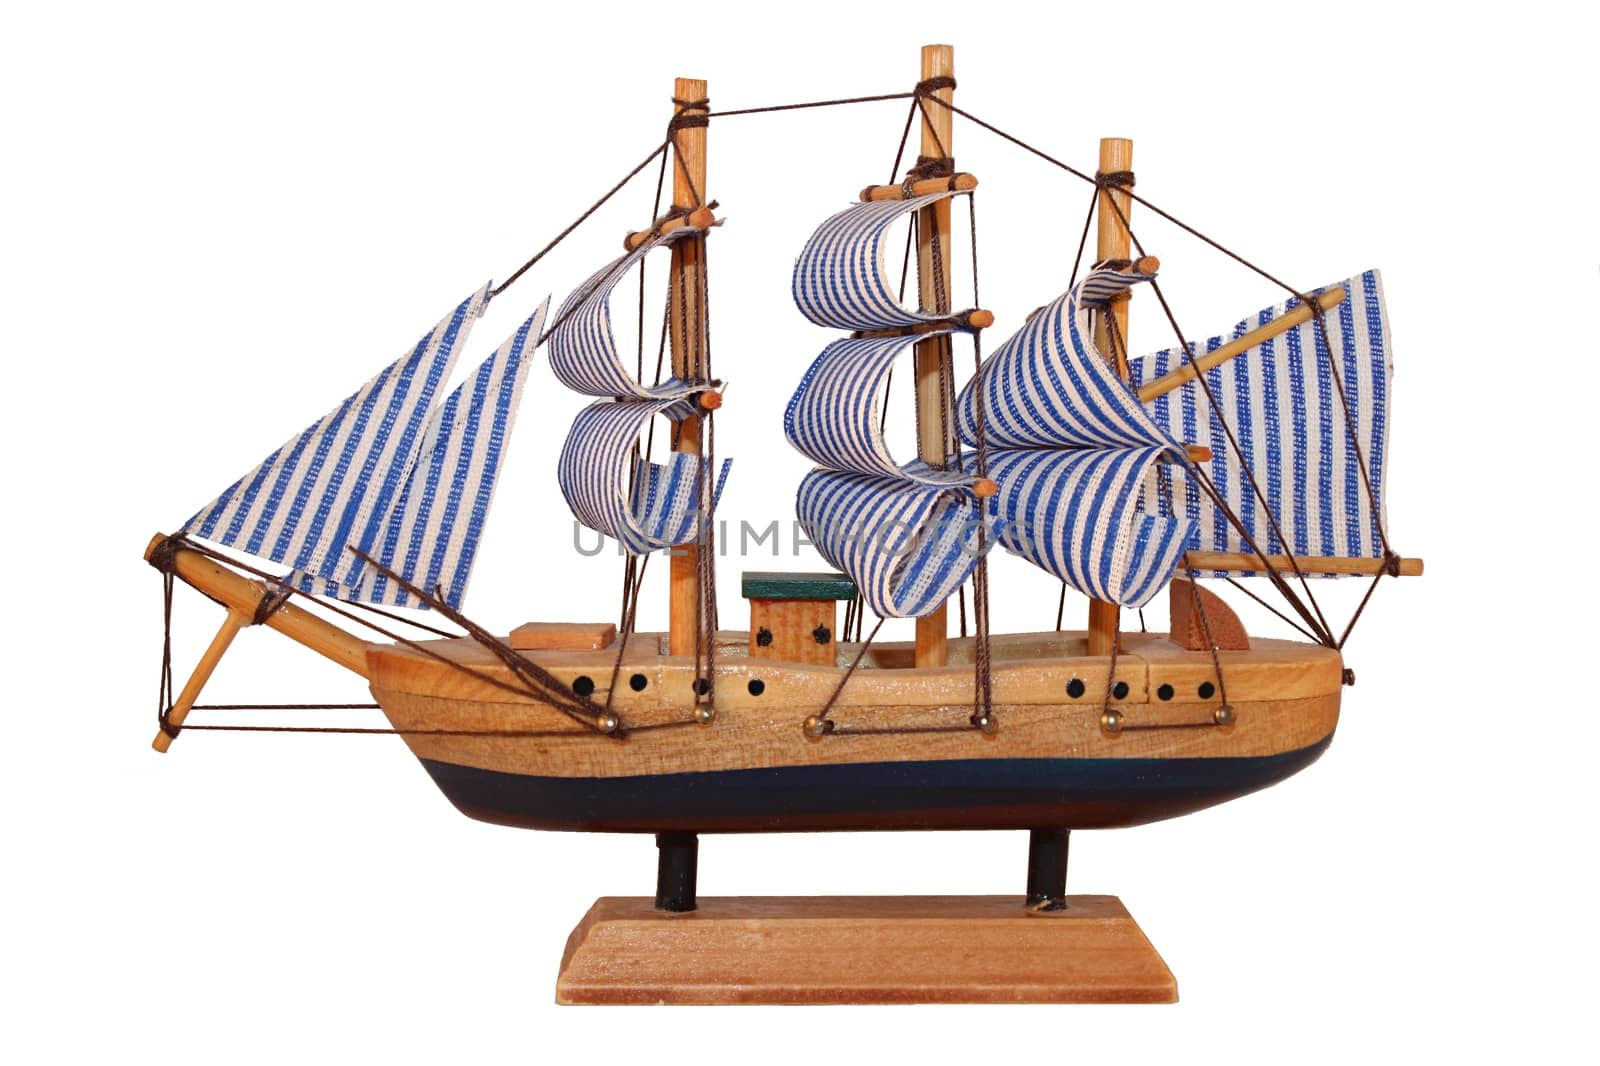 Wooden ship toy model, isolated on white background.